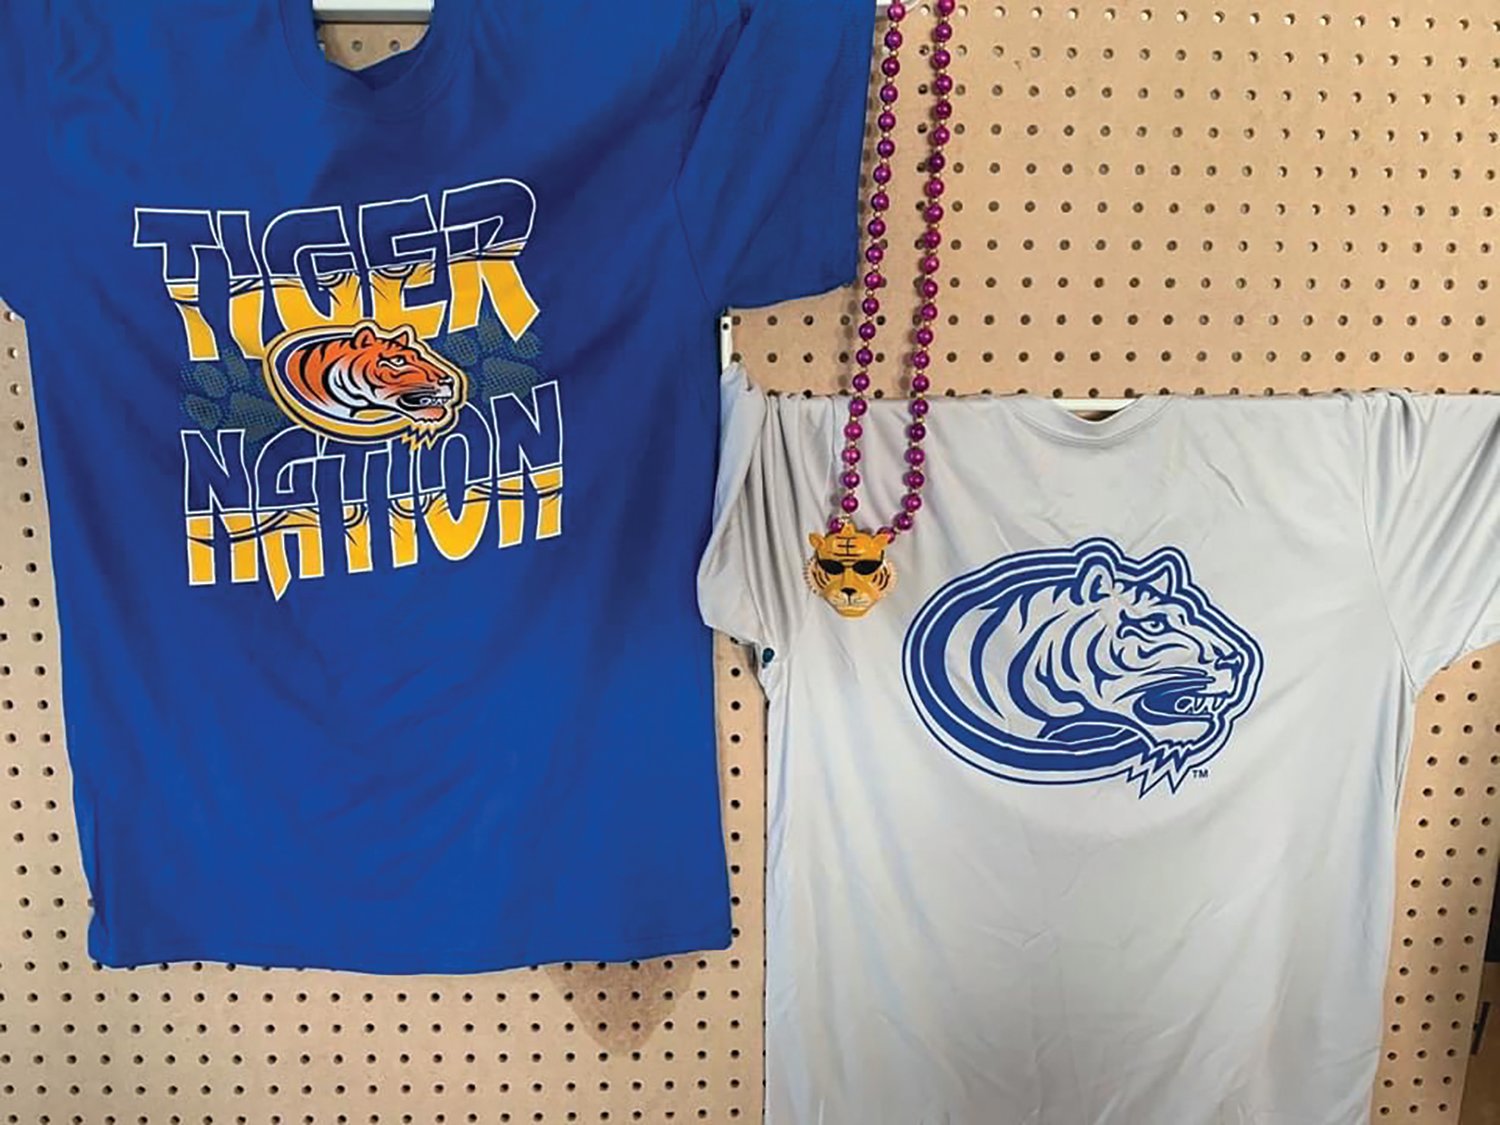 CLEWISTON — CHS Tiger T-shirts and decals are available at the new CHS Student Bookstore.